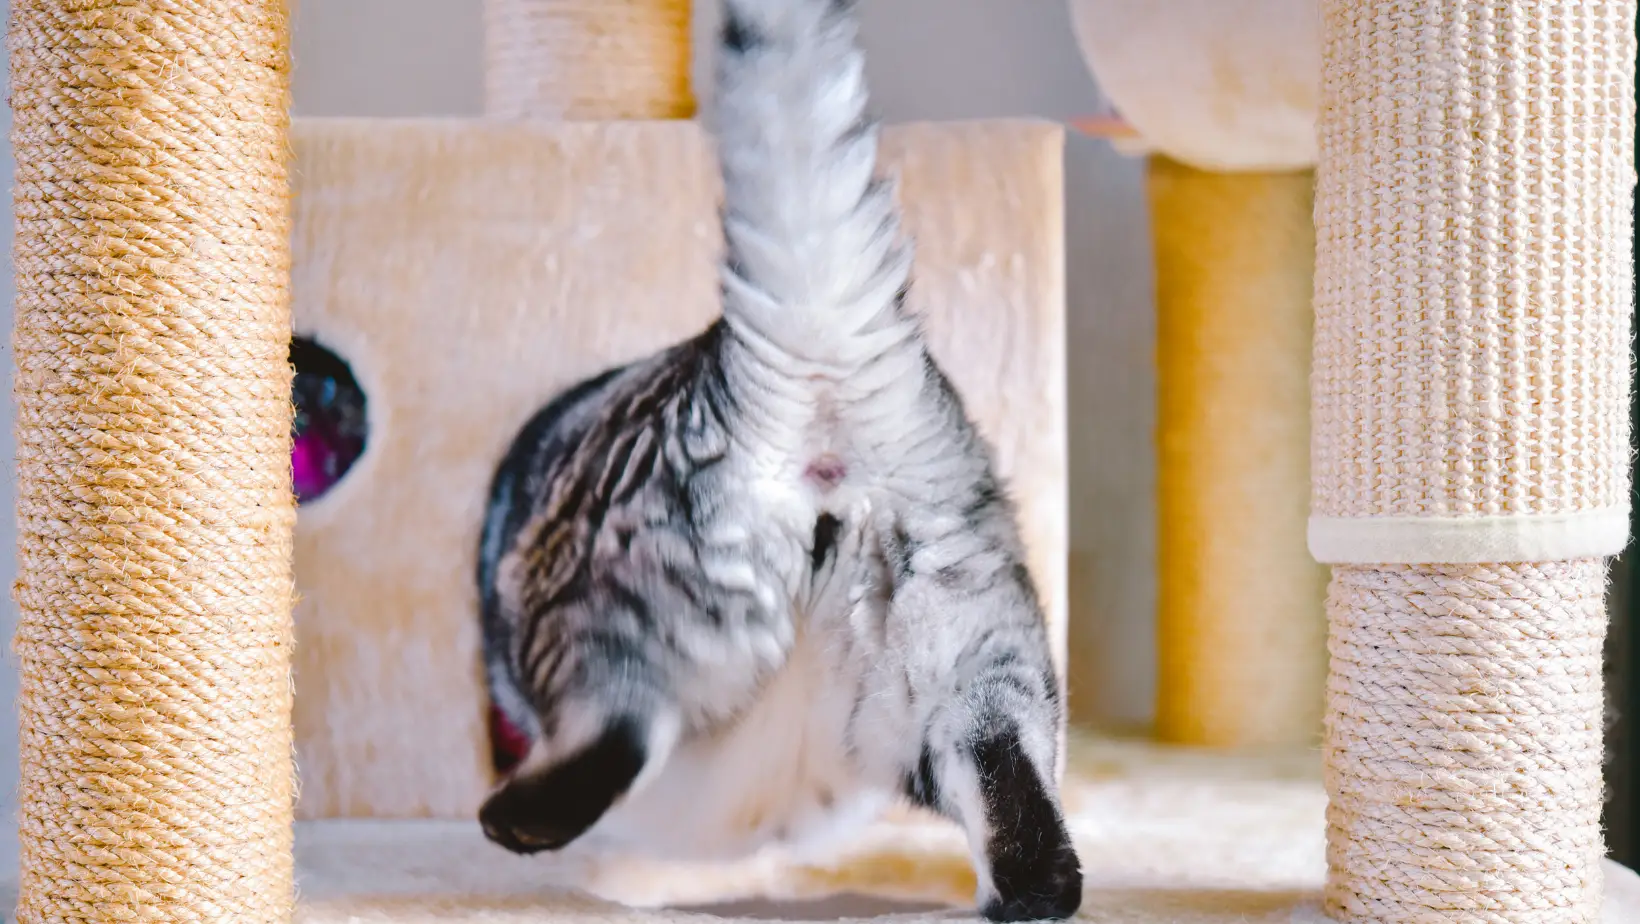 Why Do Cats Show Their Butt?